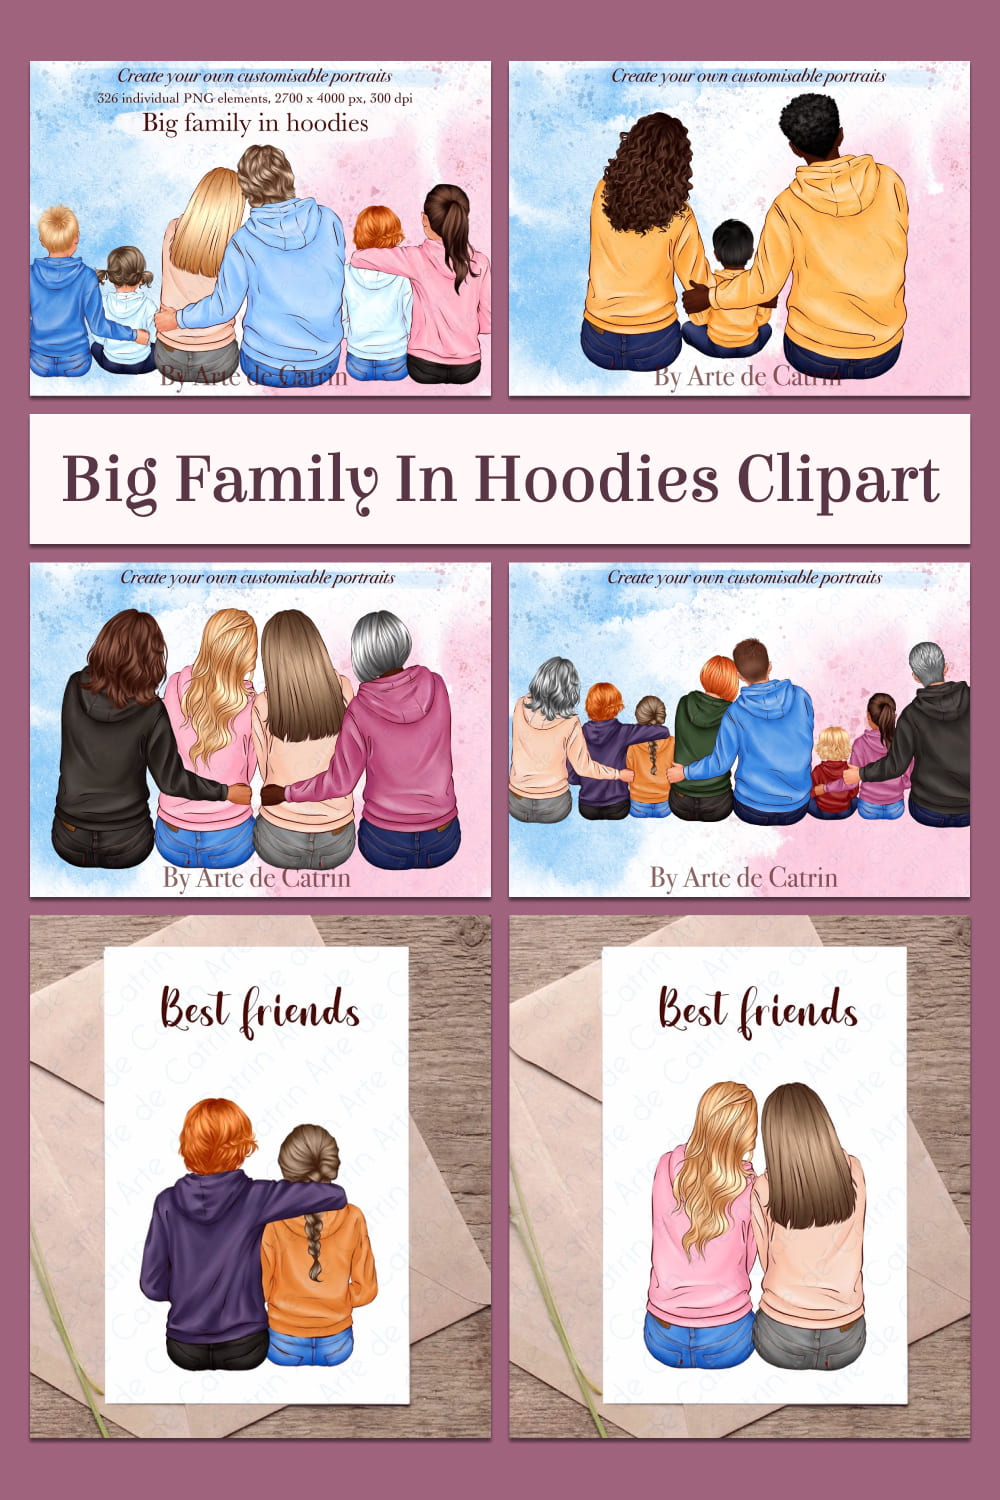 Big family in hoodies clipart - pinterest image preview.